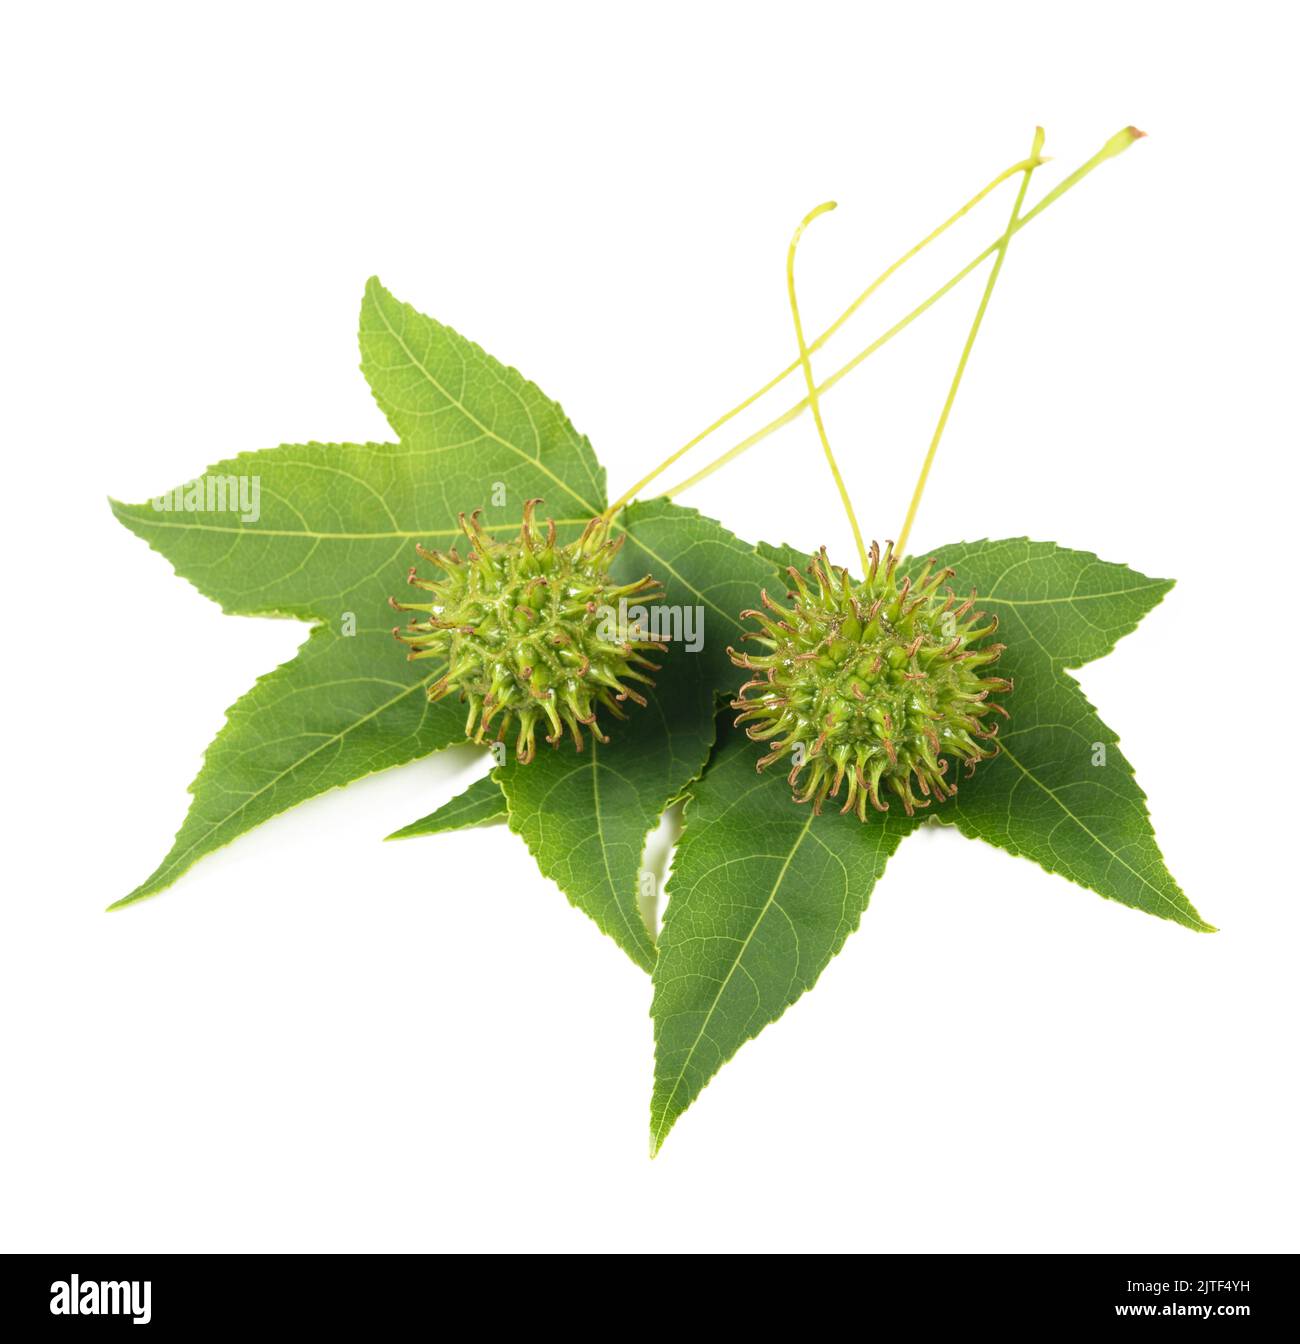 American sweetgum leaves with fruits isolated on white Stock Photo